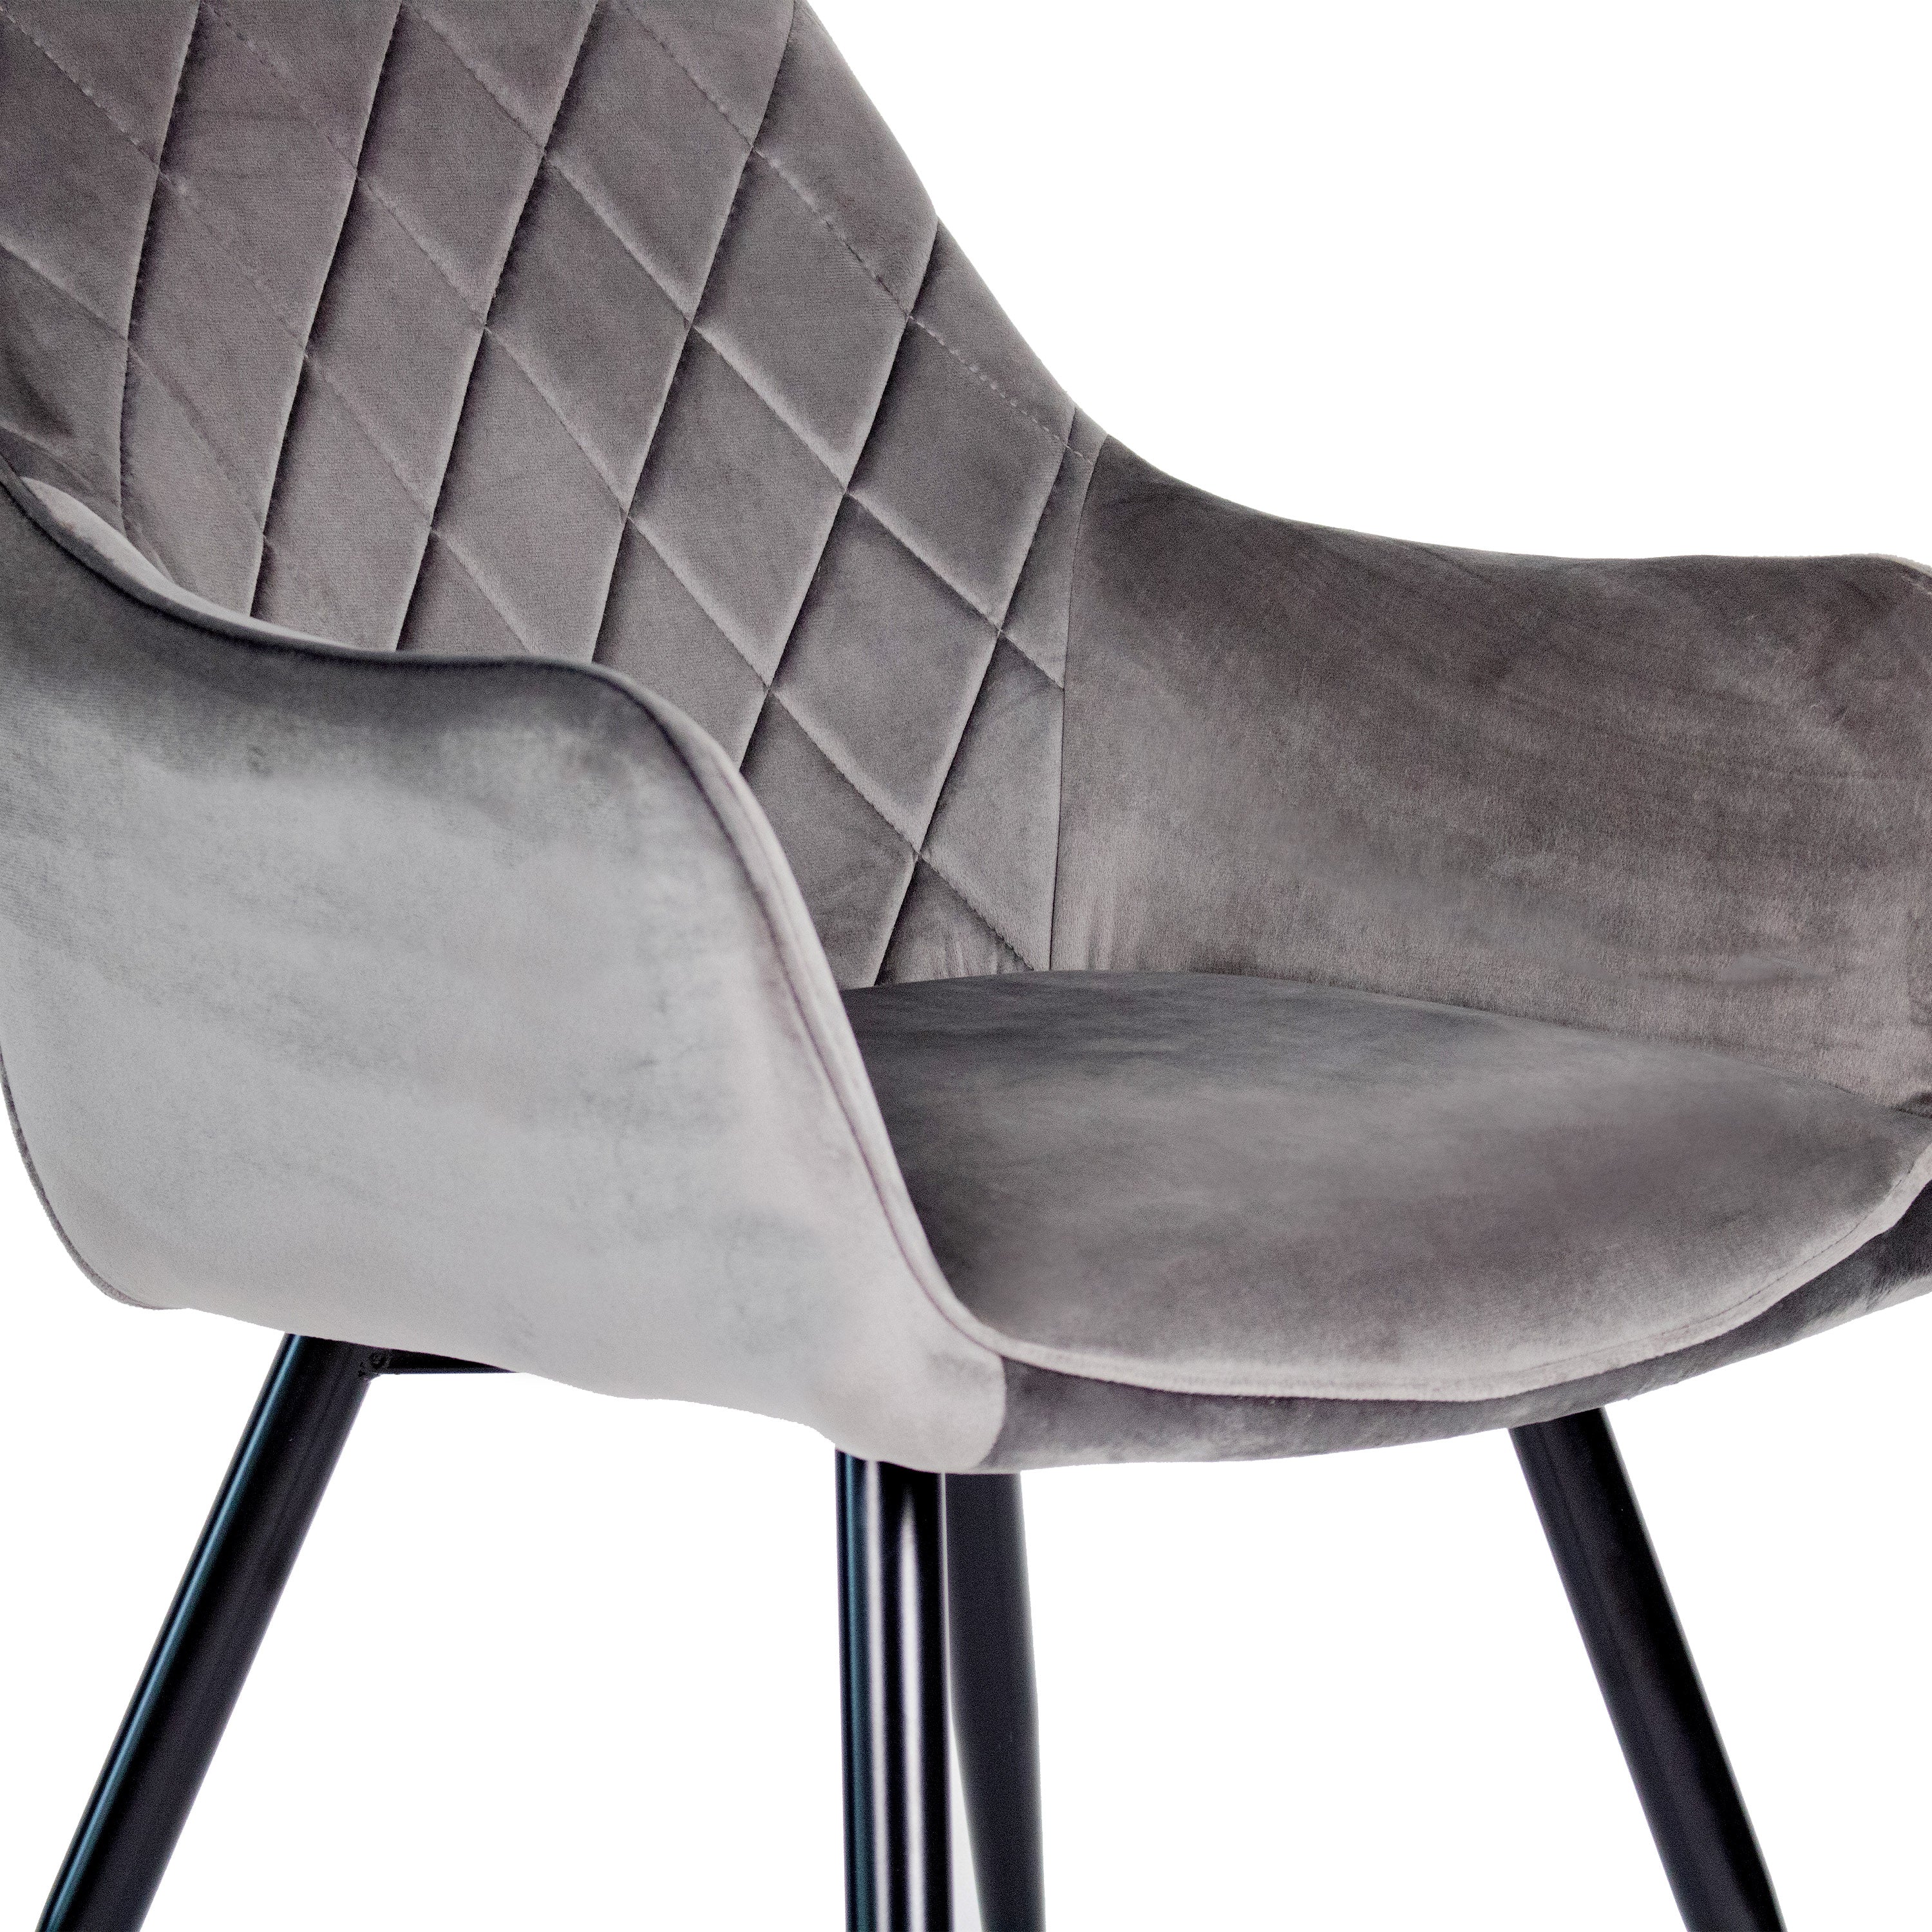 Kick Dining room chair Monza